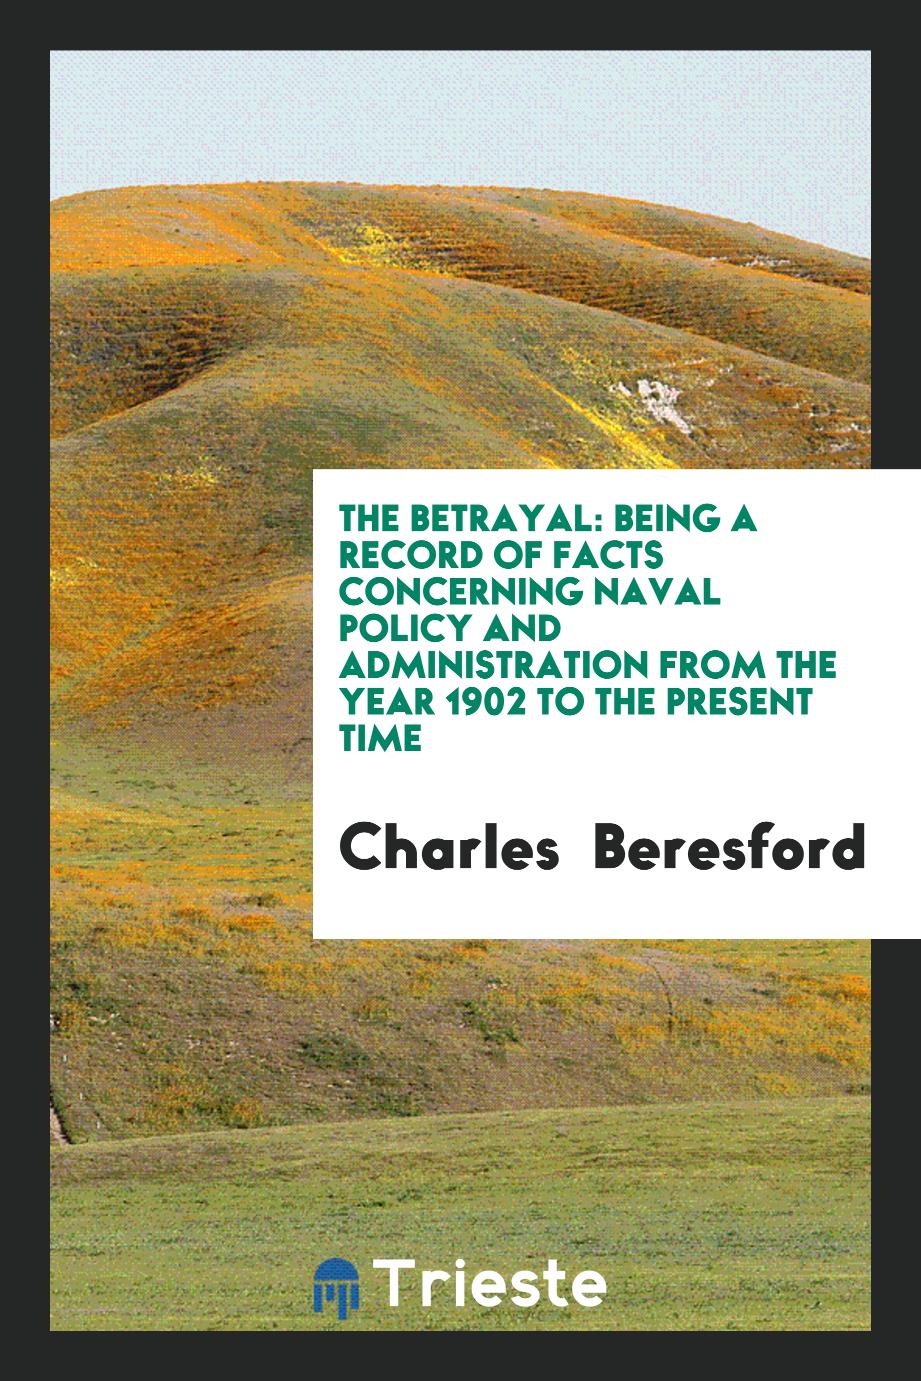 The betrayal: being a record of facts concerning naval policy and administration from the year 1902 to the present time